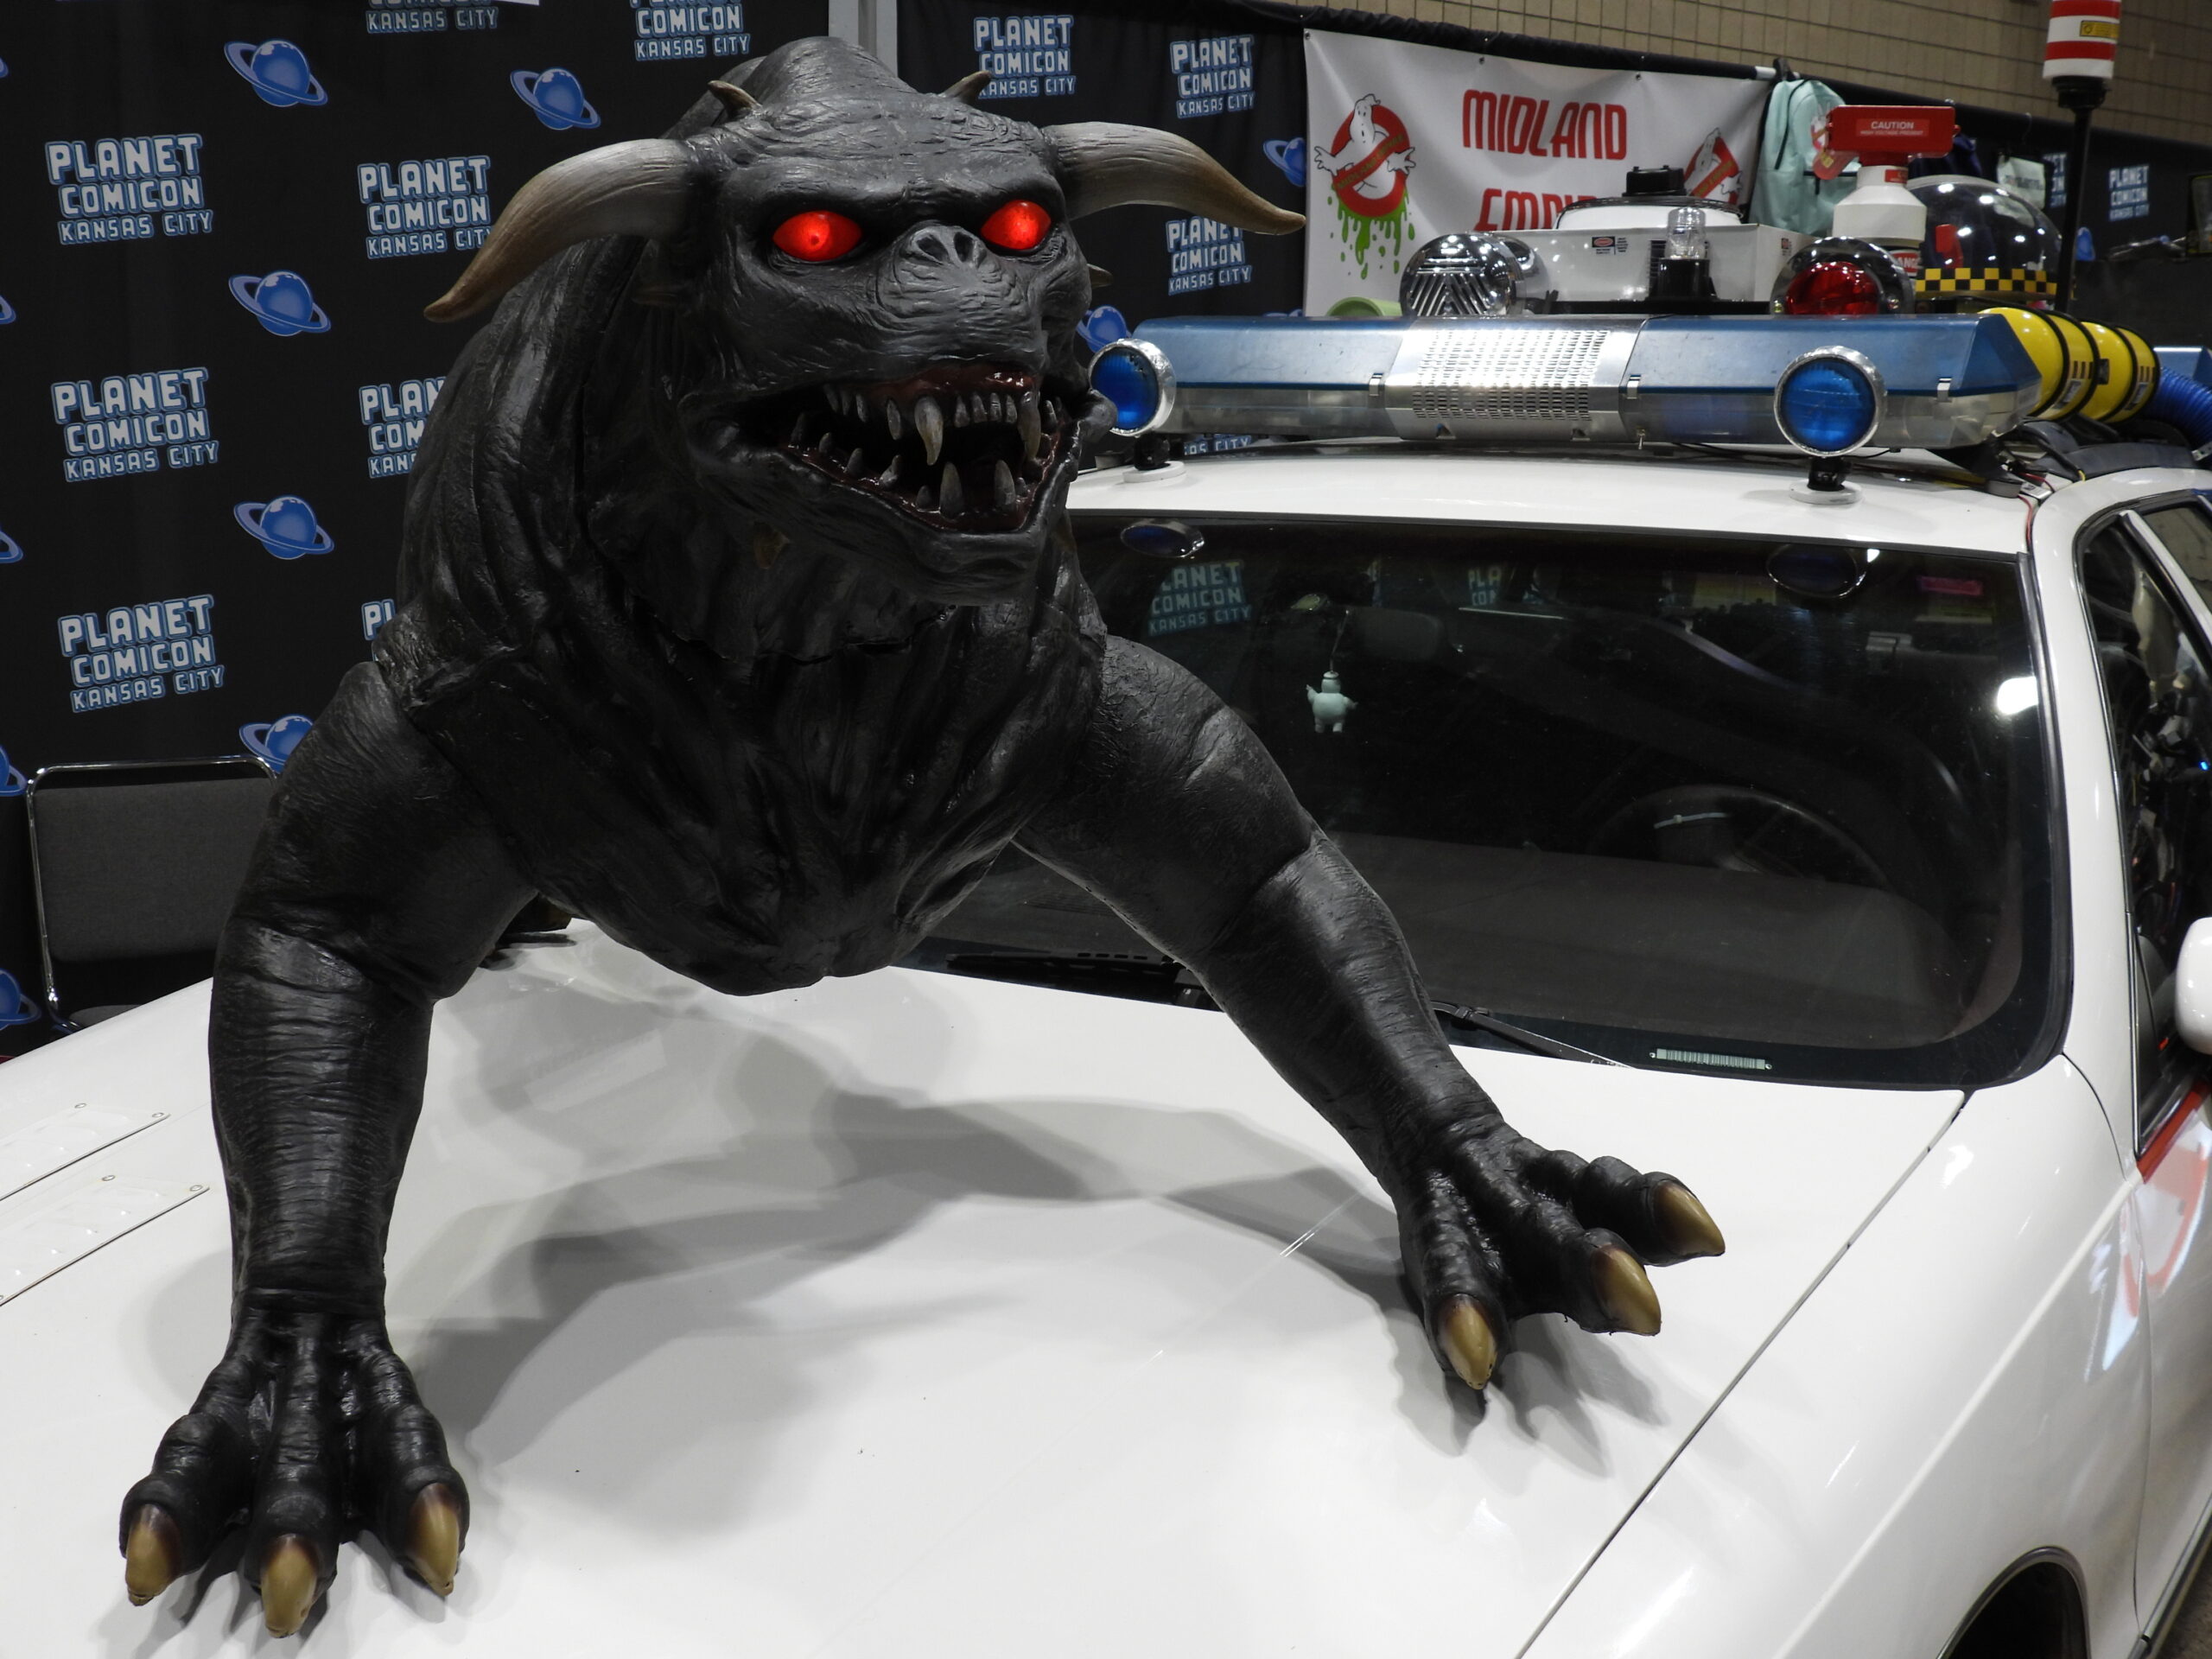 Zuul stands on top of the Ghostbusters car